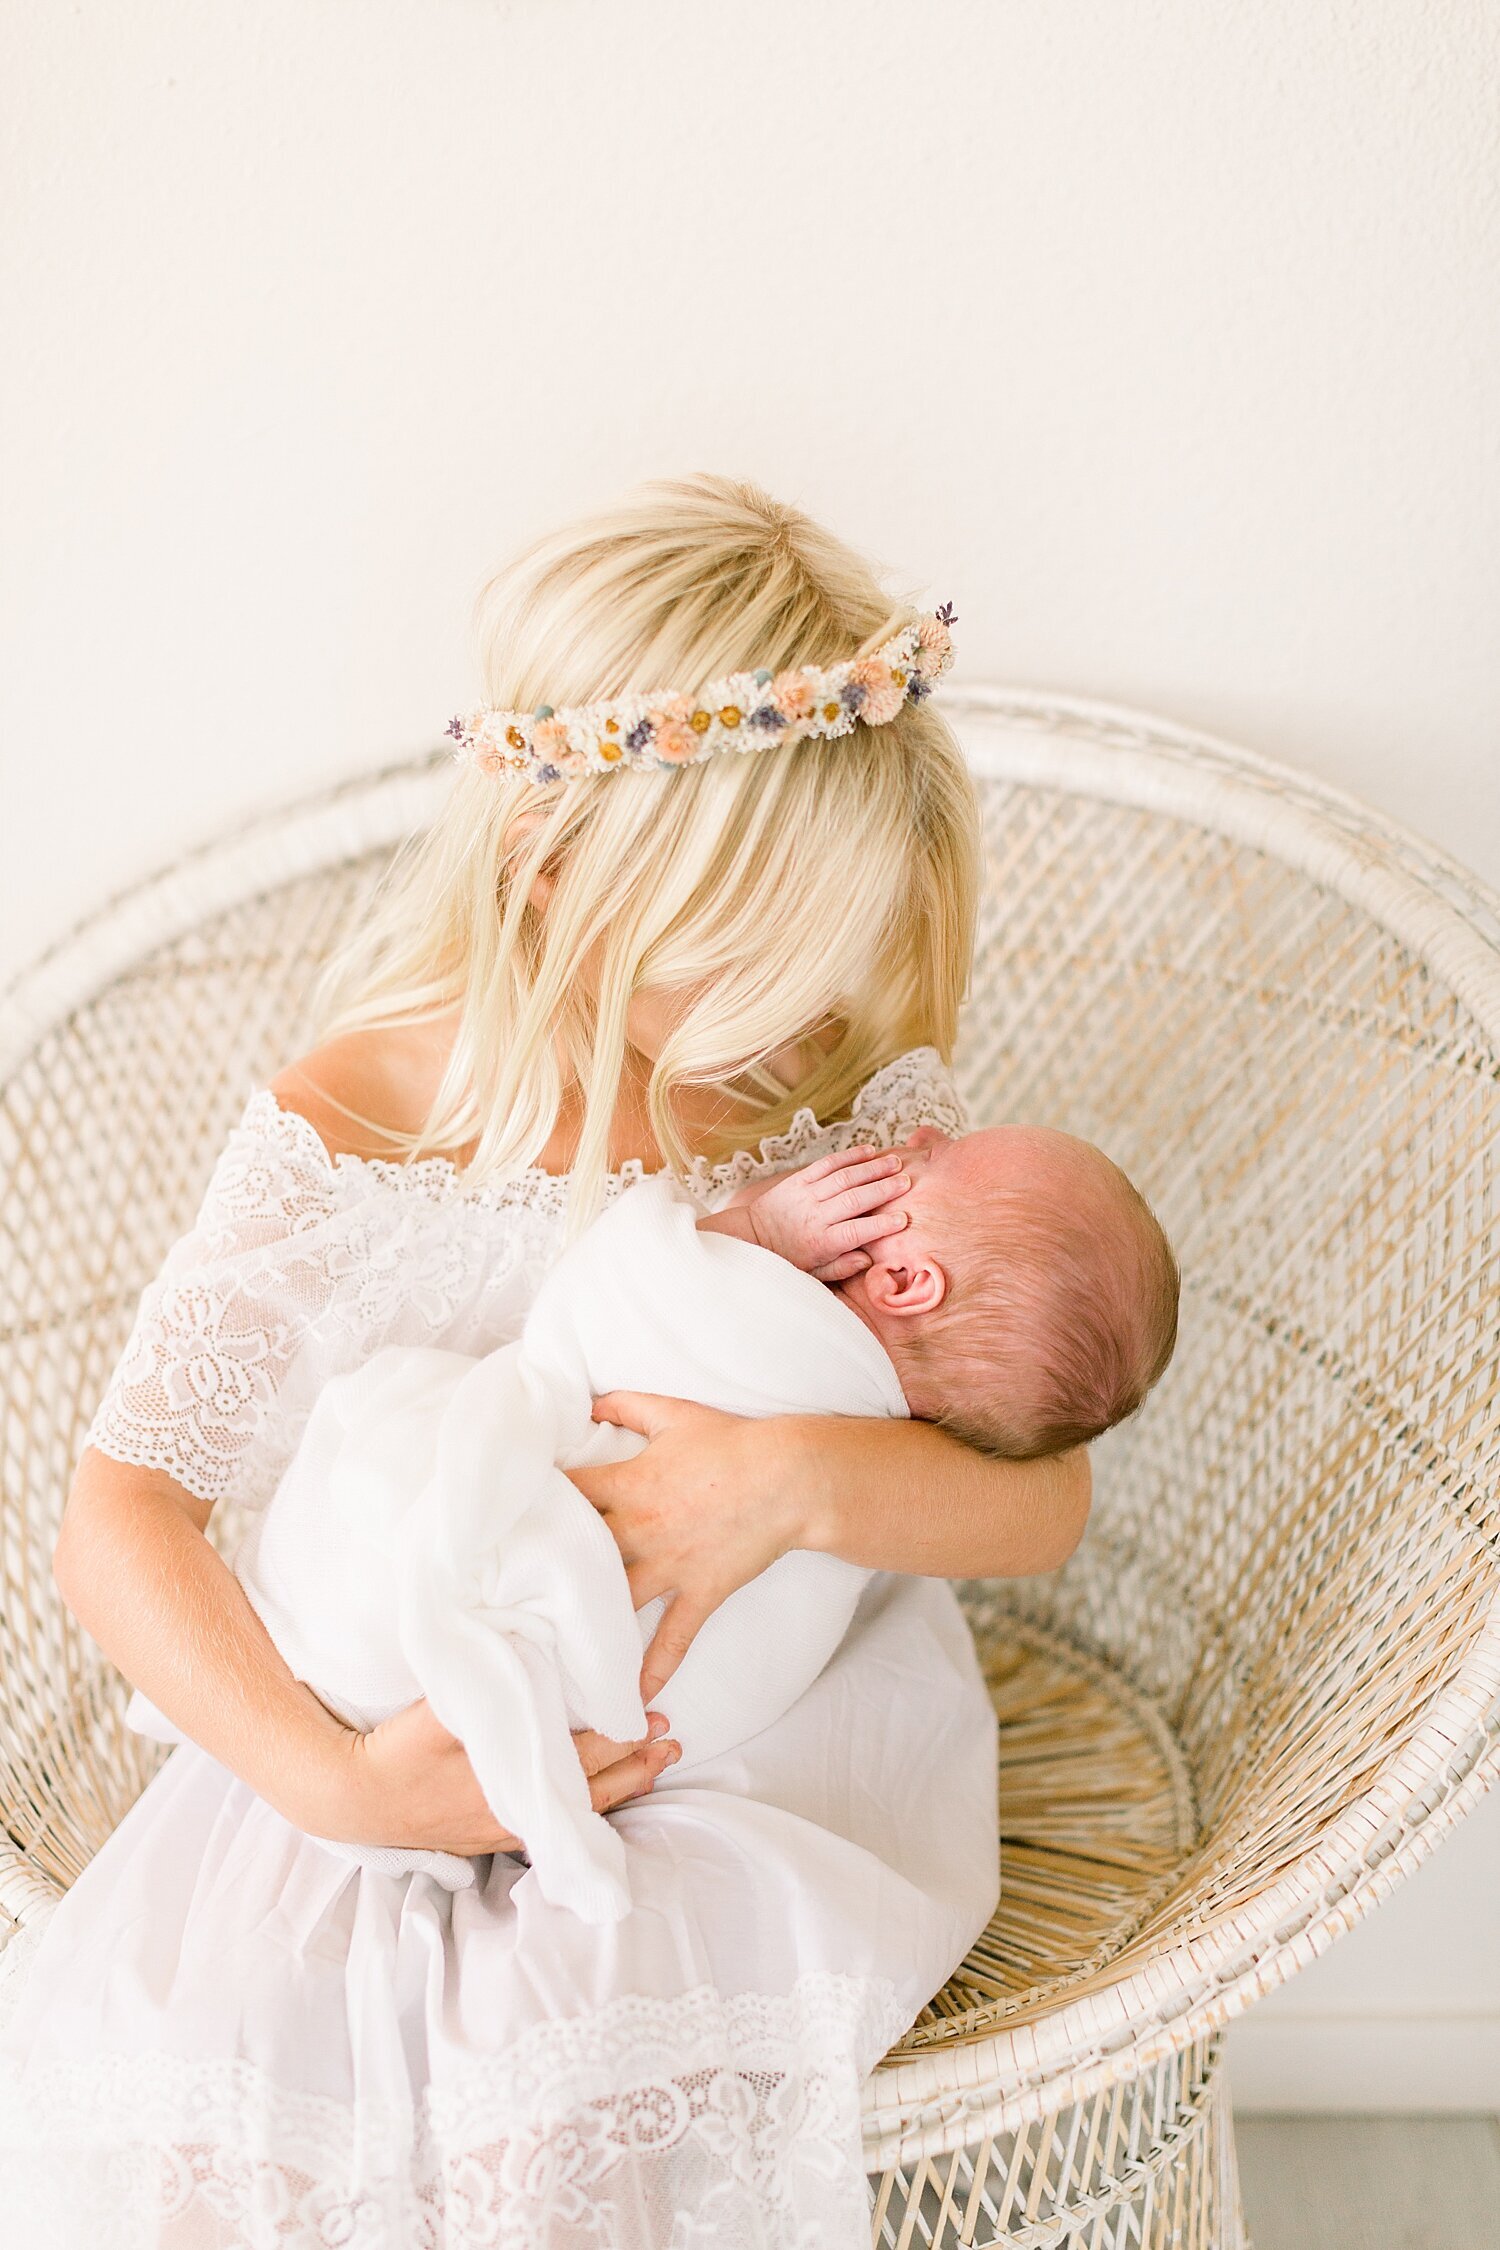 Big sister holding her baby brother | Ambre Williams Photography